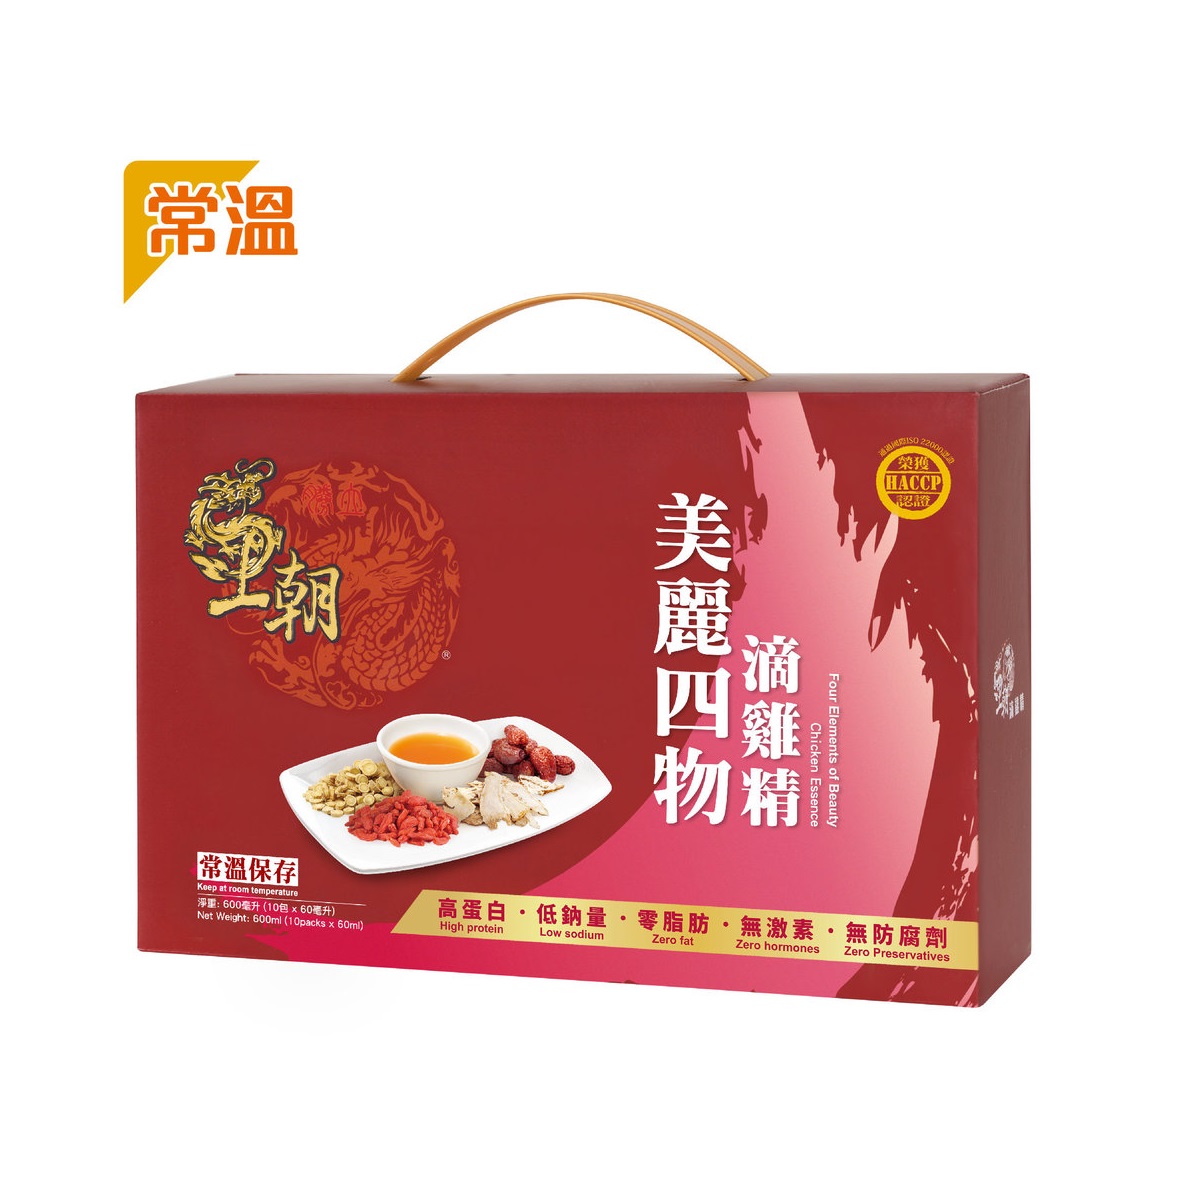 Wang Chao Chicken Essence (Original Flavor) (Ambient - 10 Packs) + (Four Element of Beauty Flavor) (Ambient - 10 Packs)